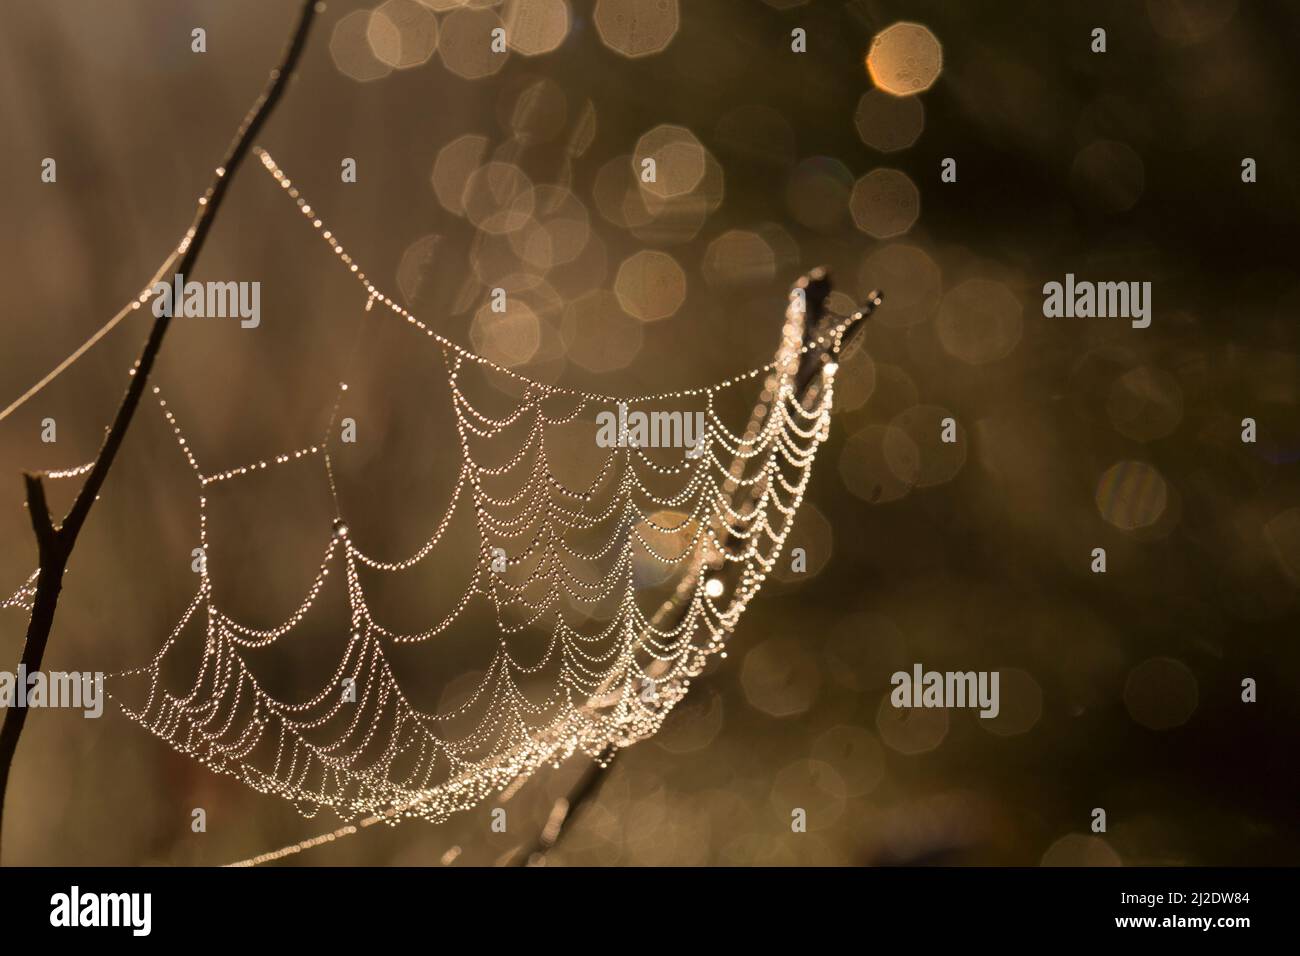 Pearls of Dew on the delicate spider web strands Stock Photo